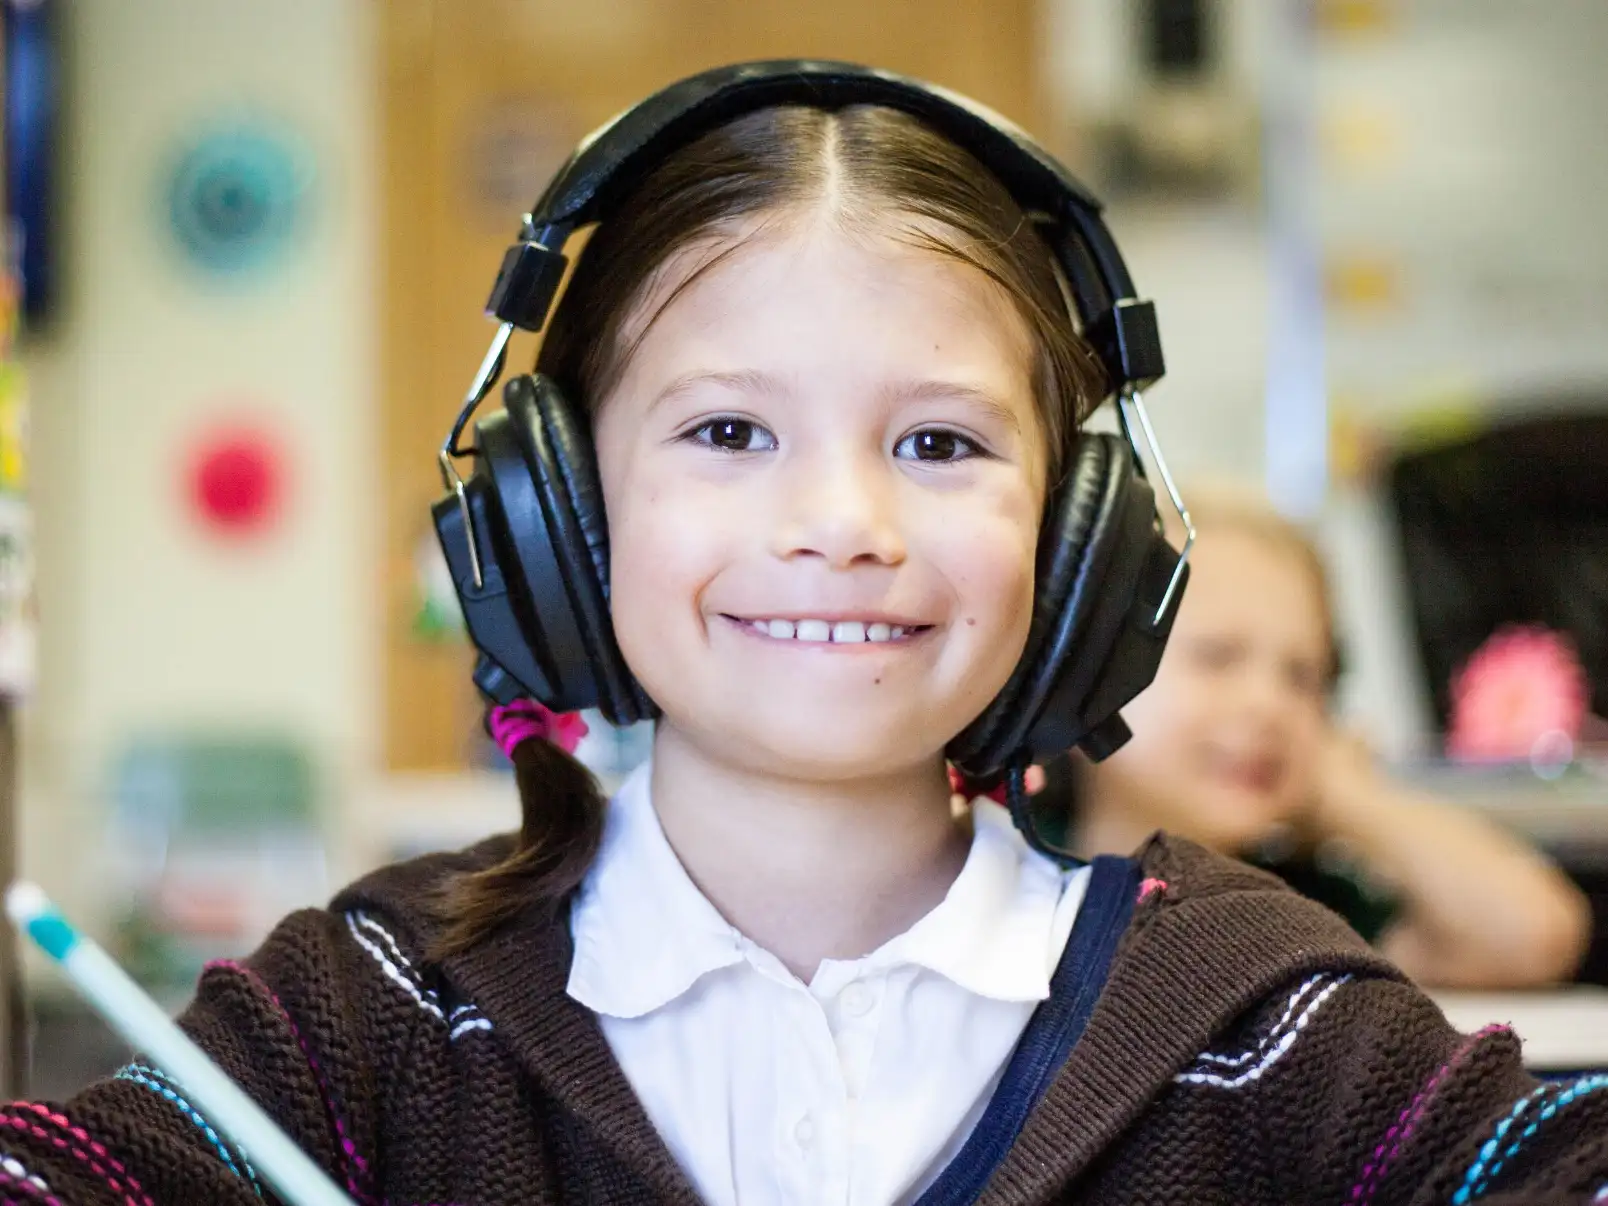 A girl wearing headphones in a classroom